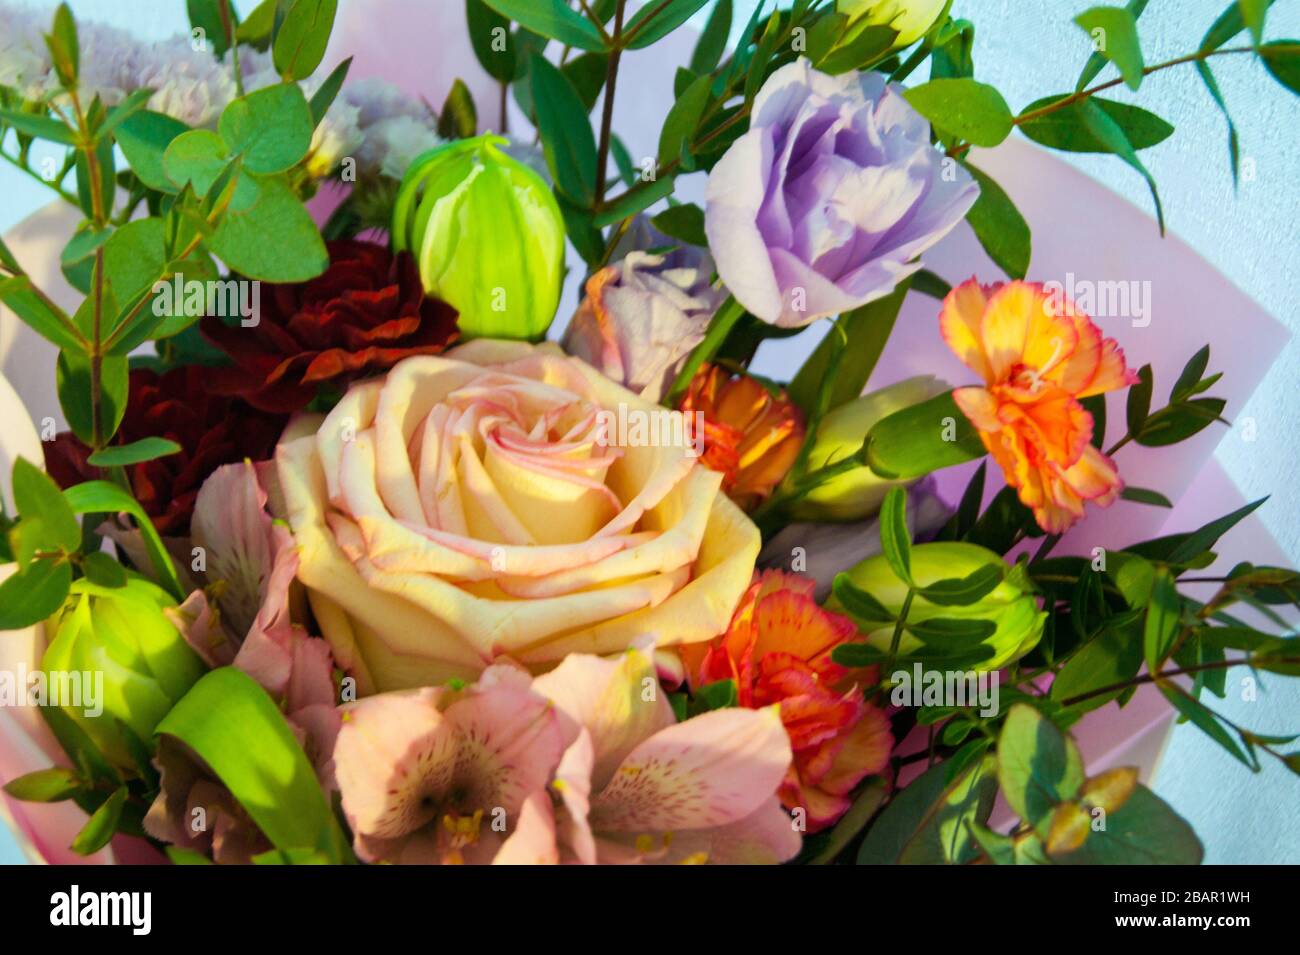 Delicate bouquet of different flowers in pink packaging. Close-up horizontal photo. Stock Photo